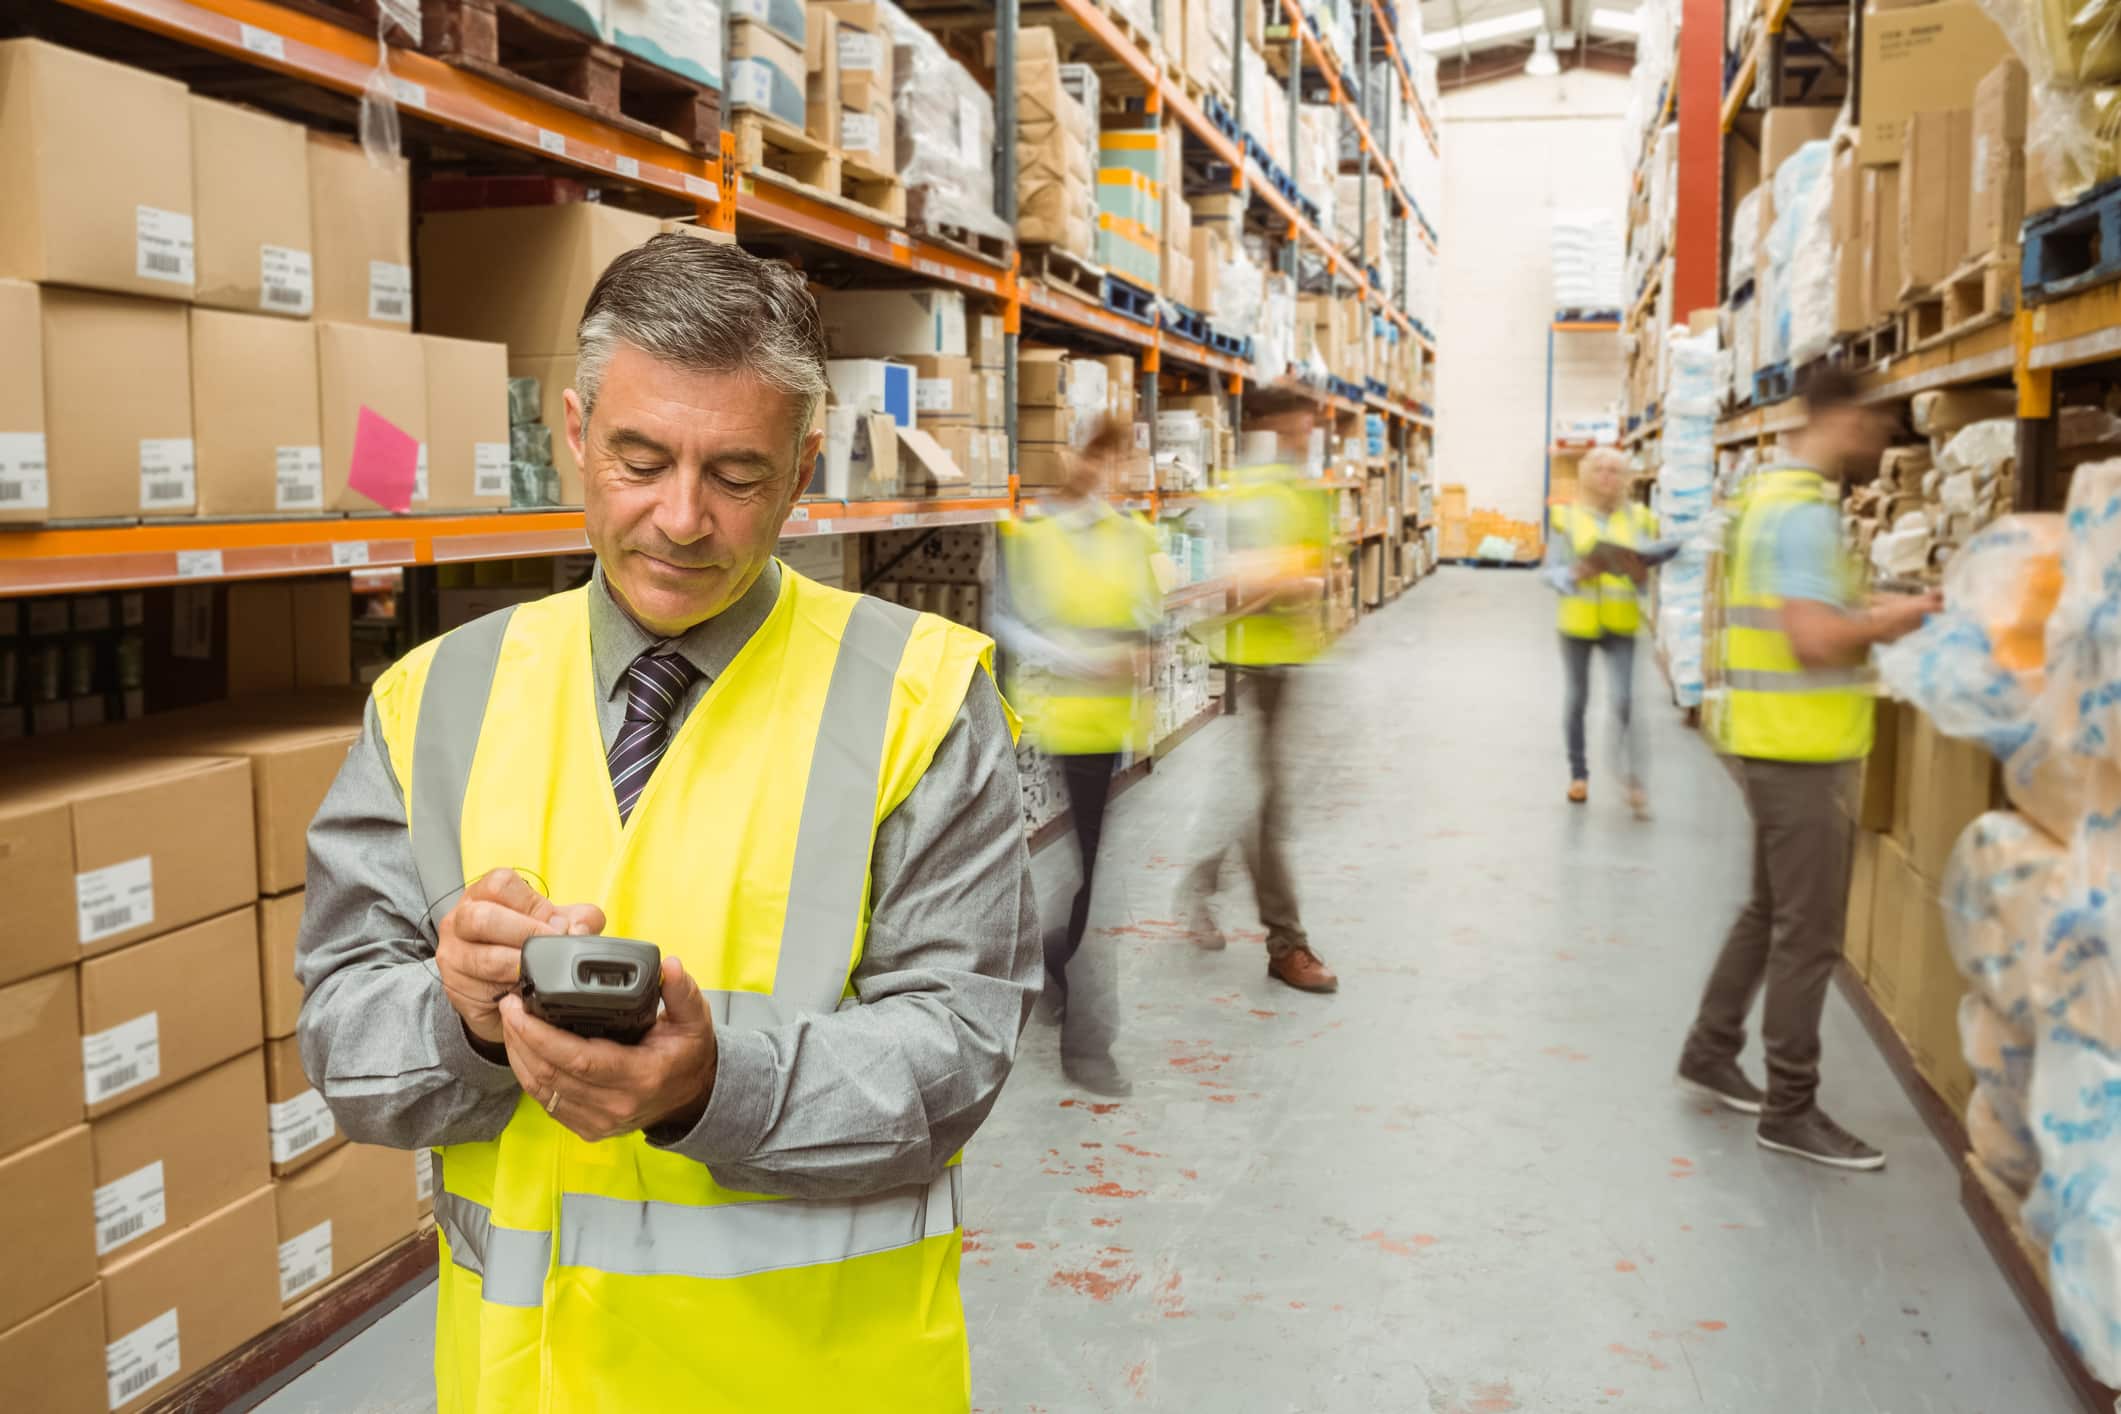 male warehouse manager checking stock with team behind him working